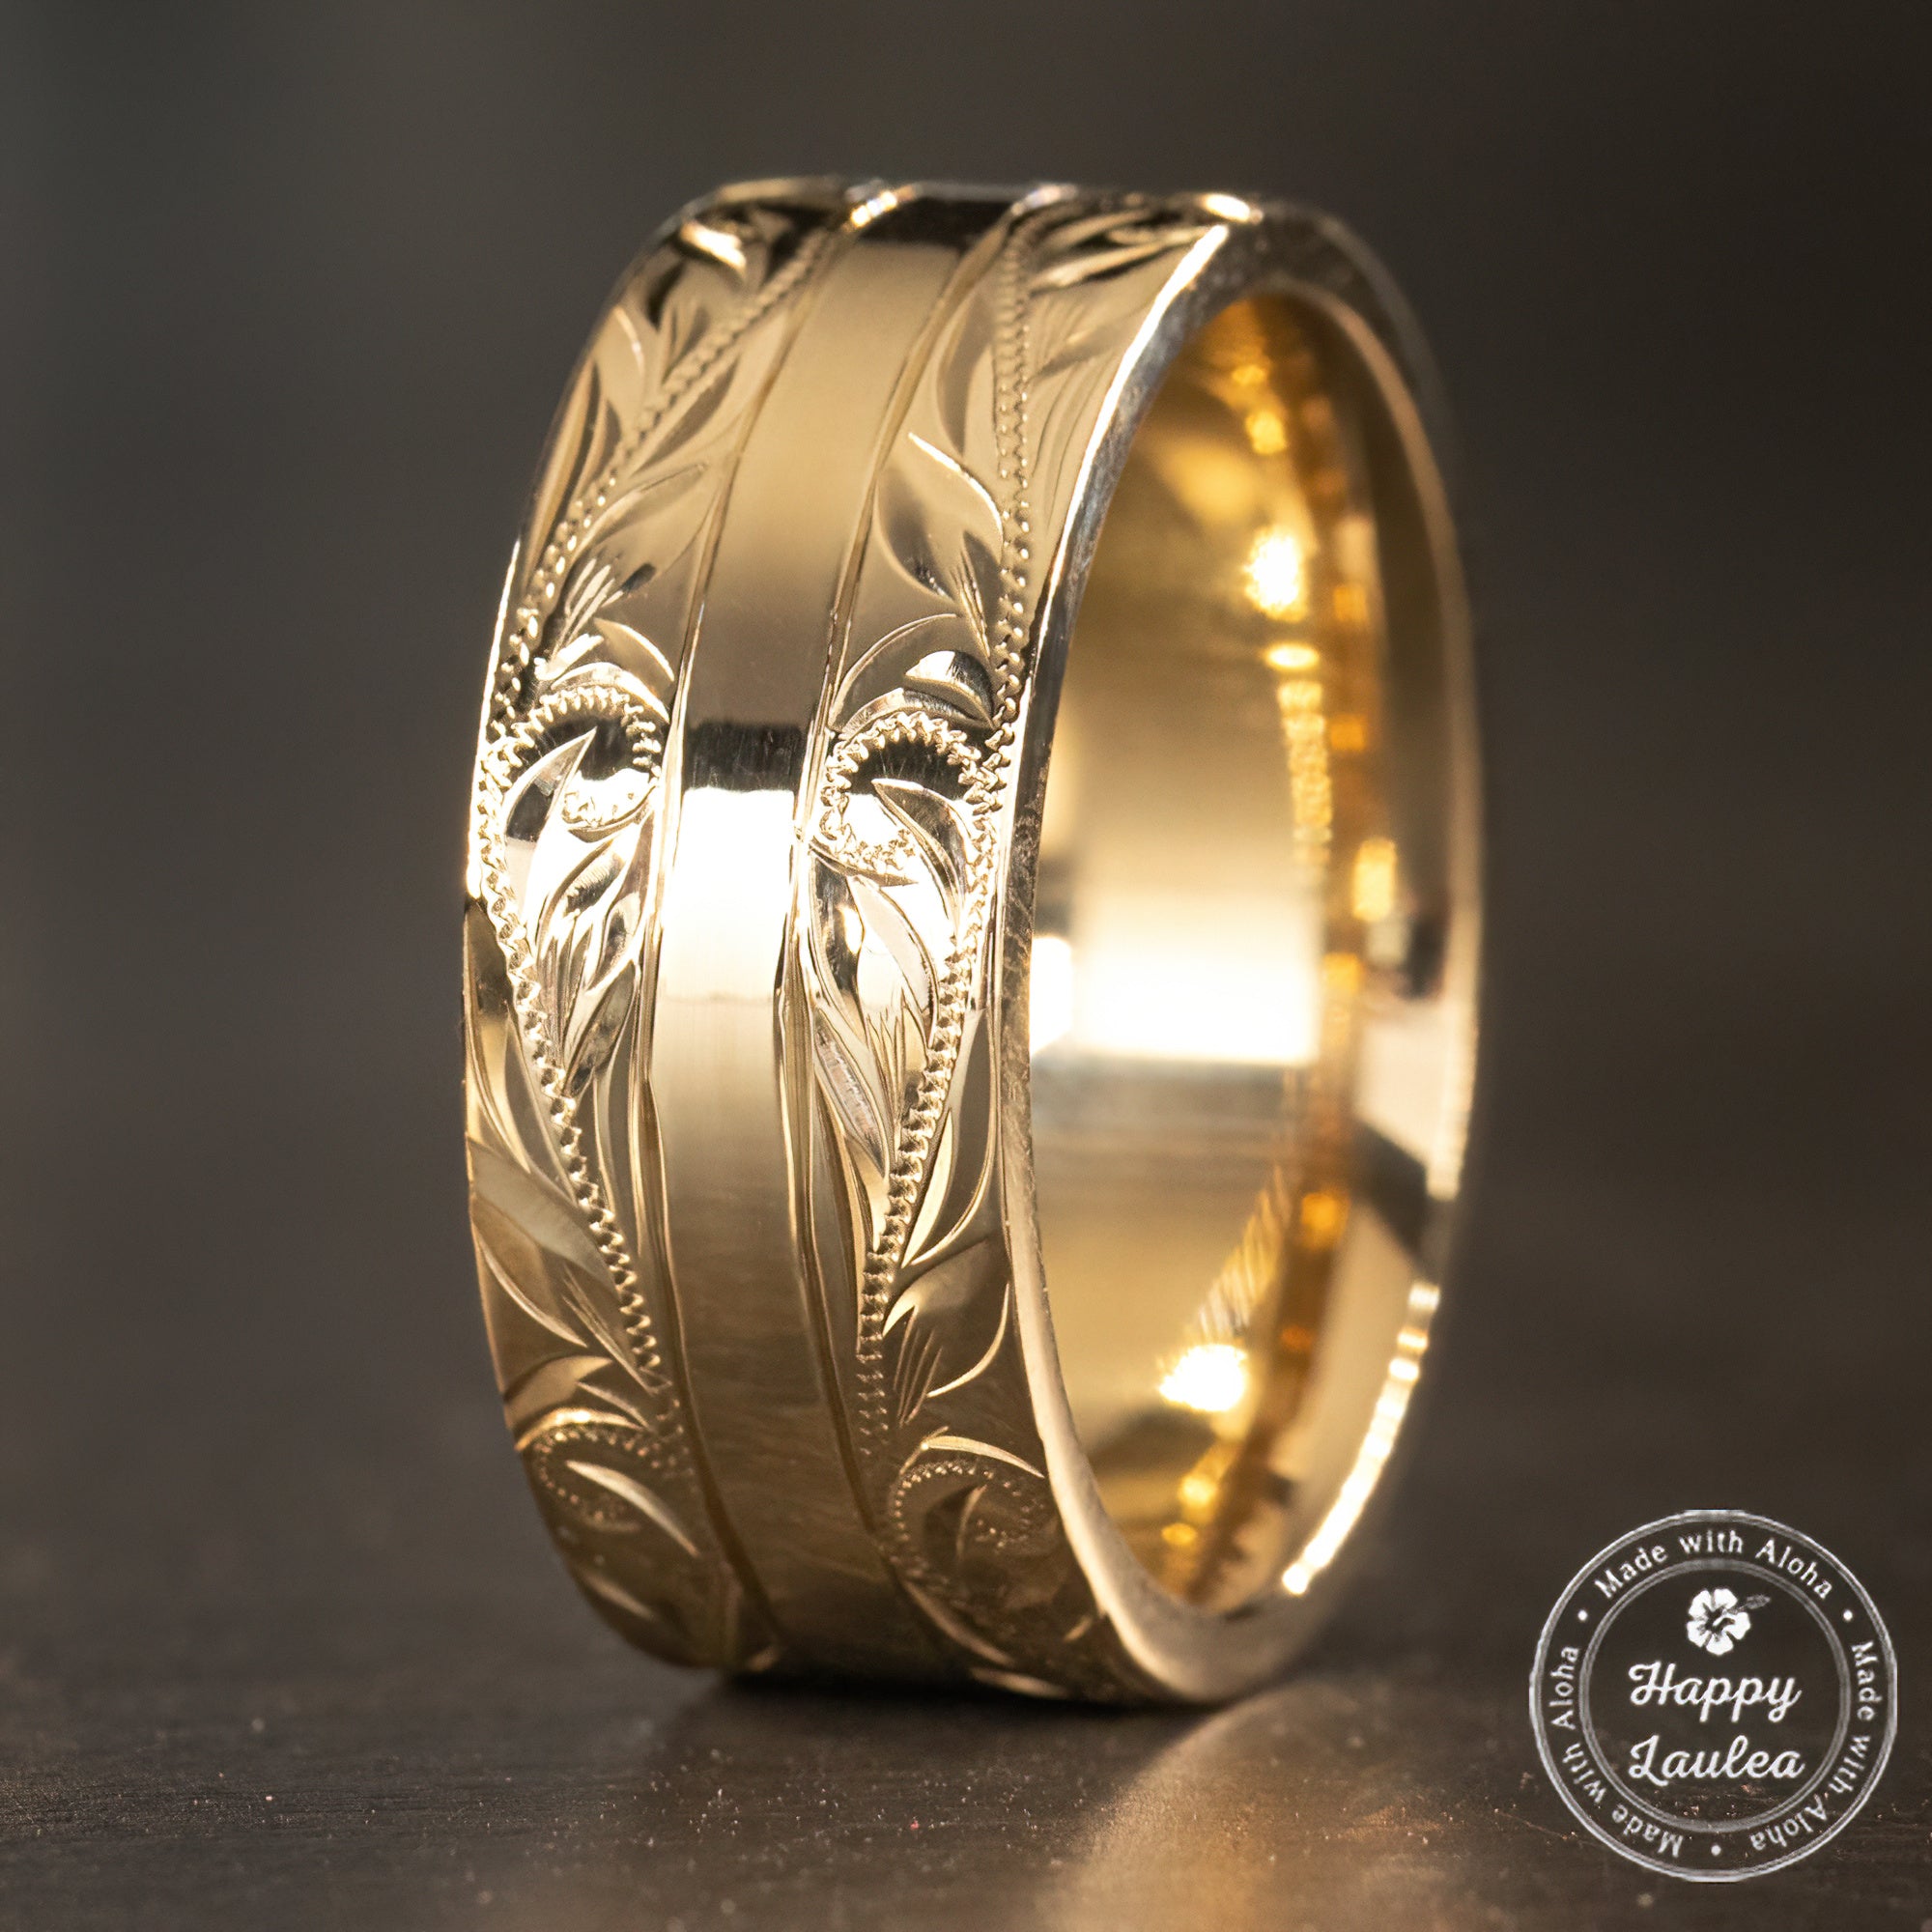 Solid Gold/Platinum Contemporary Hawaiian Jewelry Ring [8mm width] Hand Engraved Old English